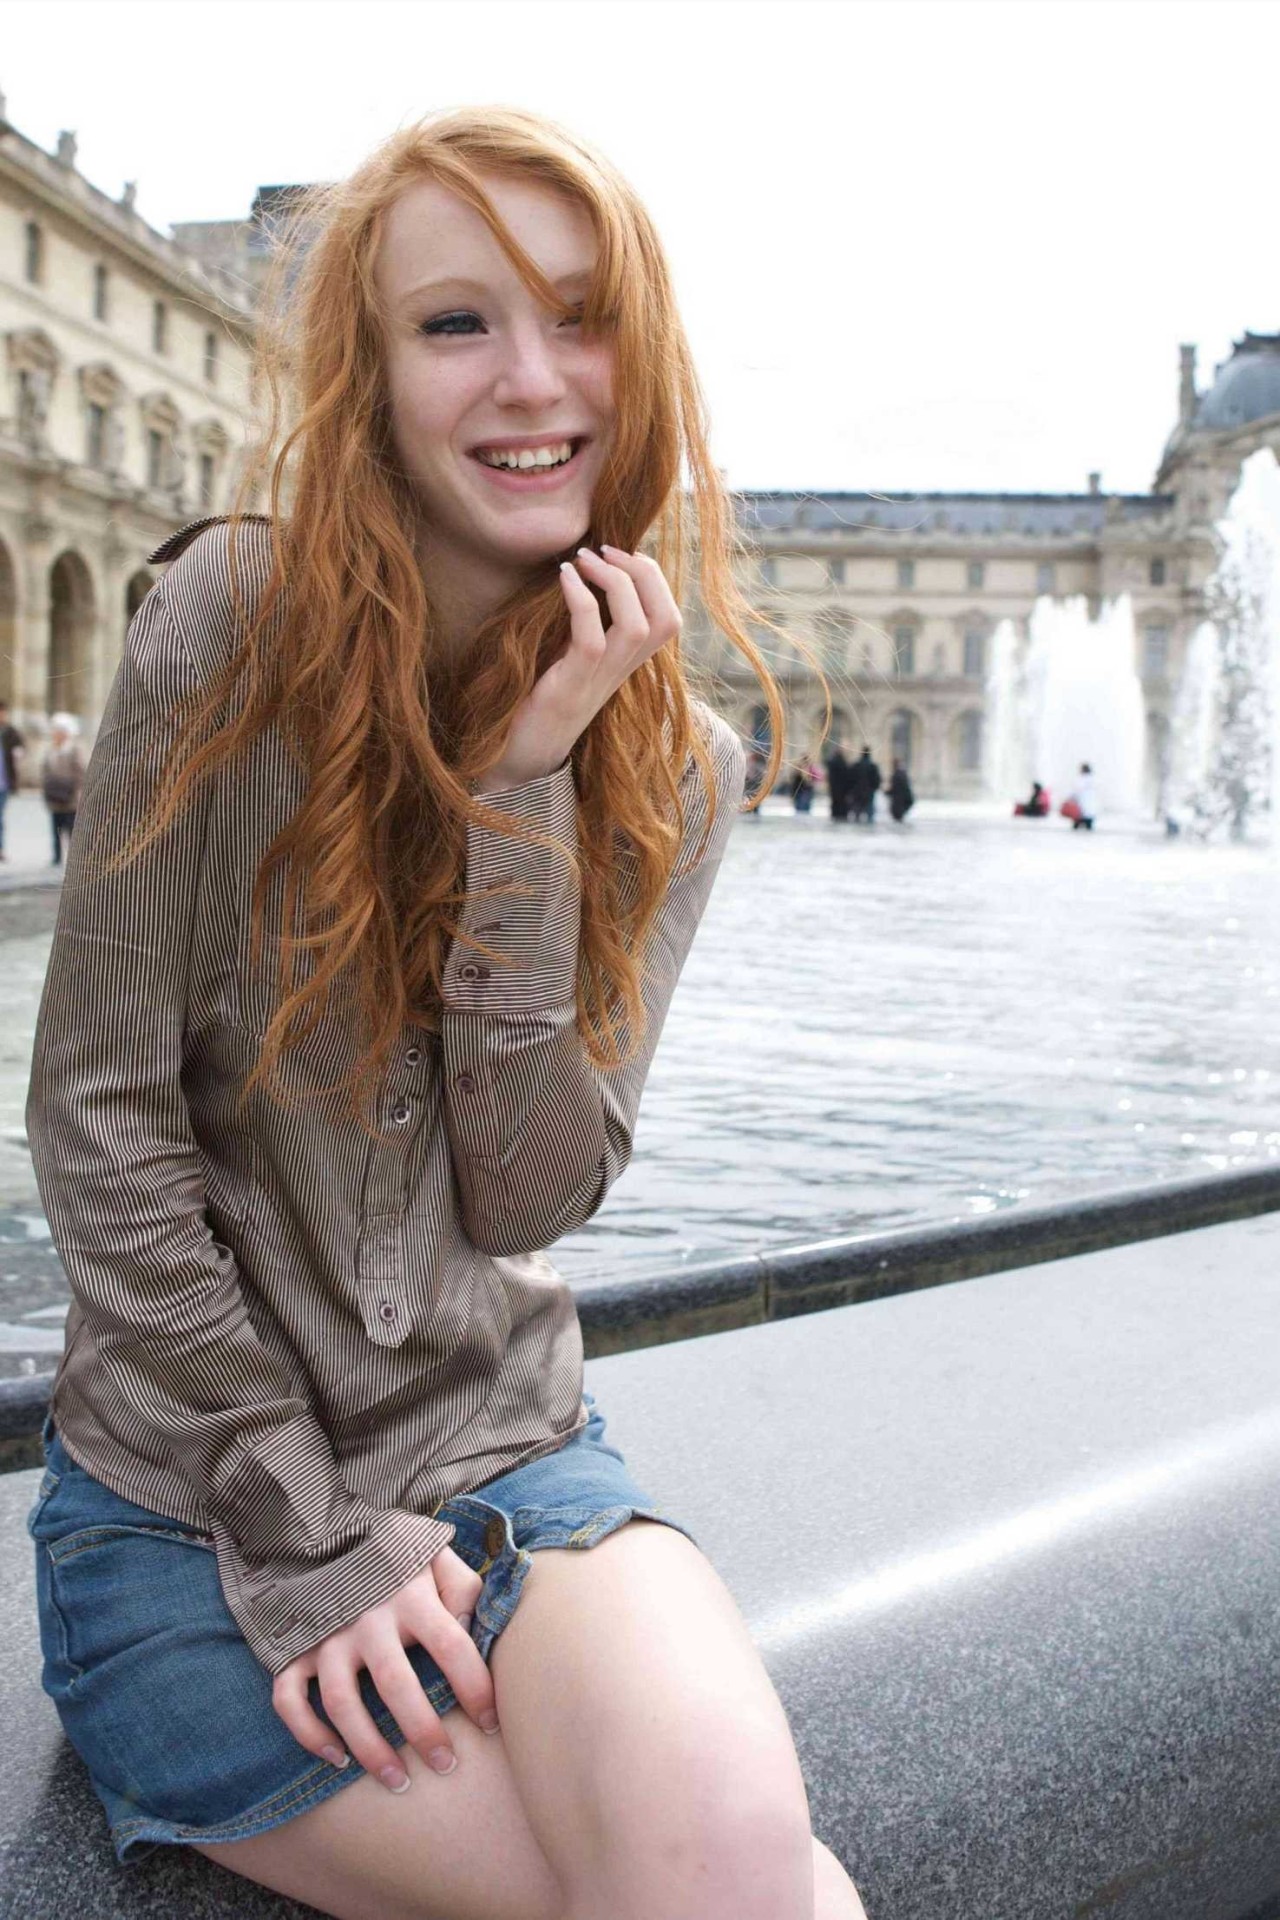 Adelle’s naughty adventure to the Louvre continues in the elevator and outside.